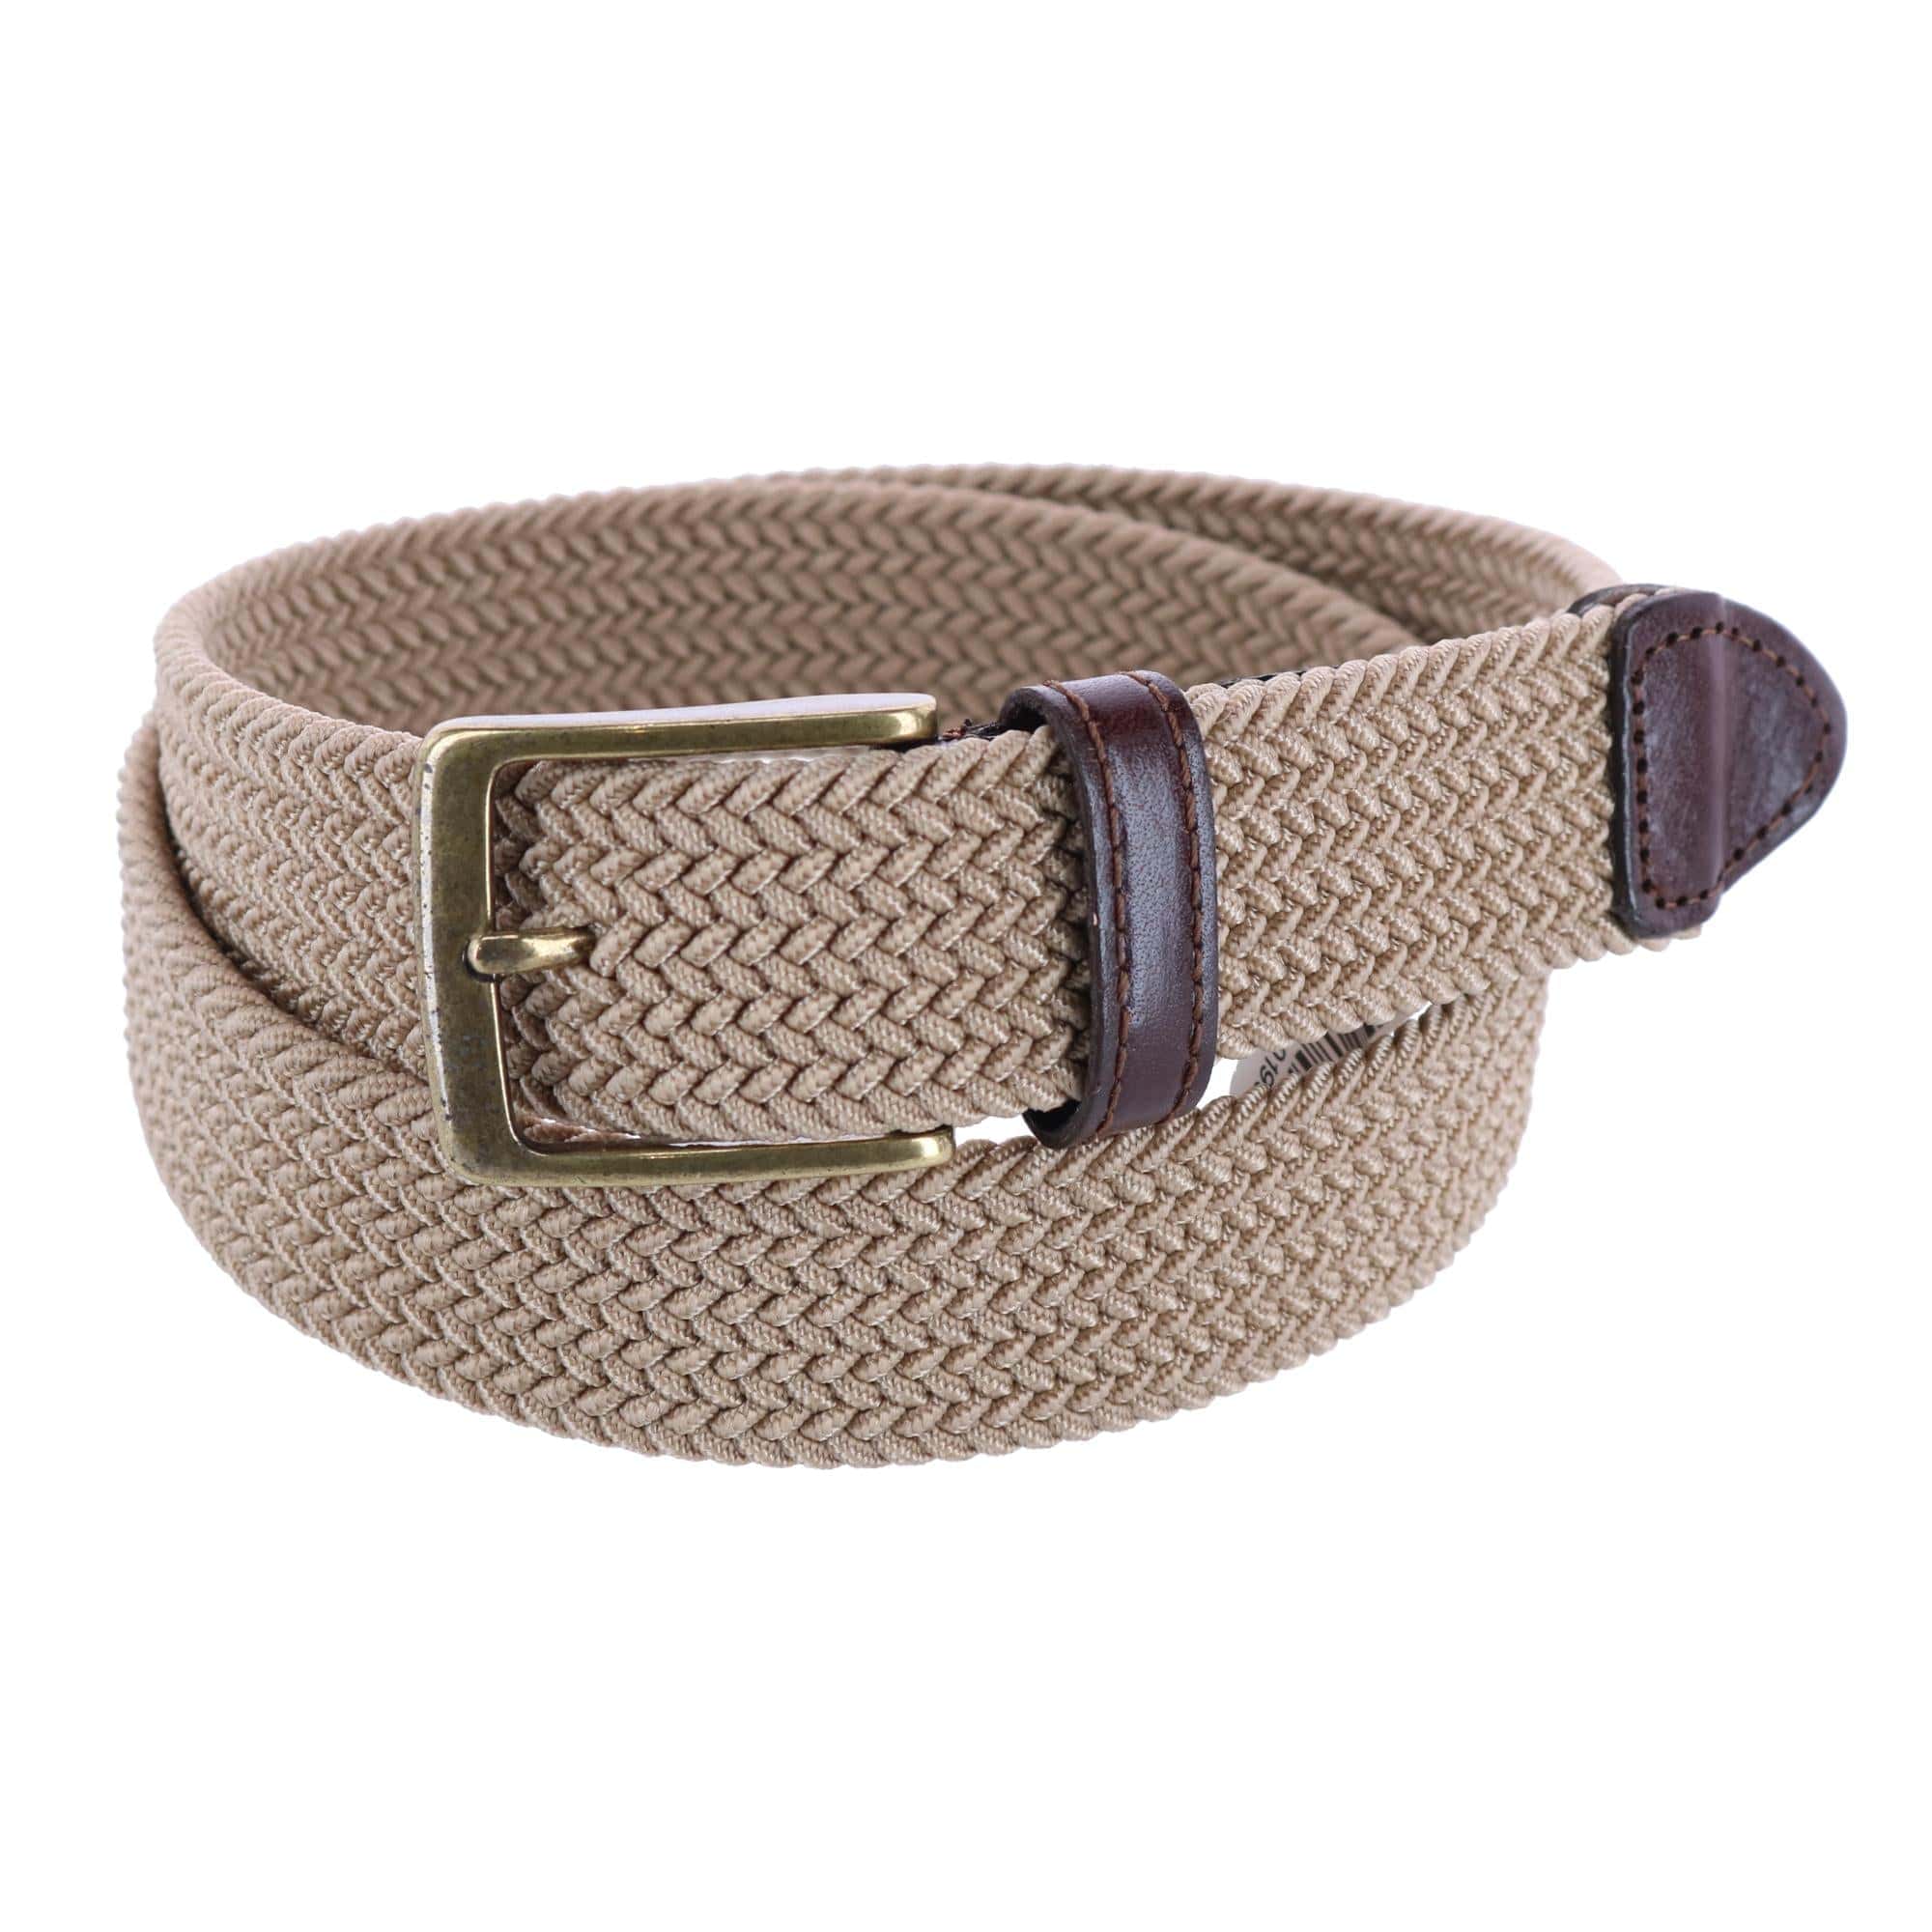 Dockers Men's Elastic Braided Stretch Belt with Leather Tabs